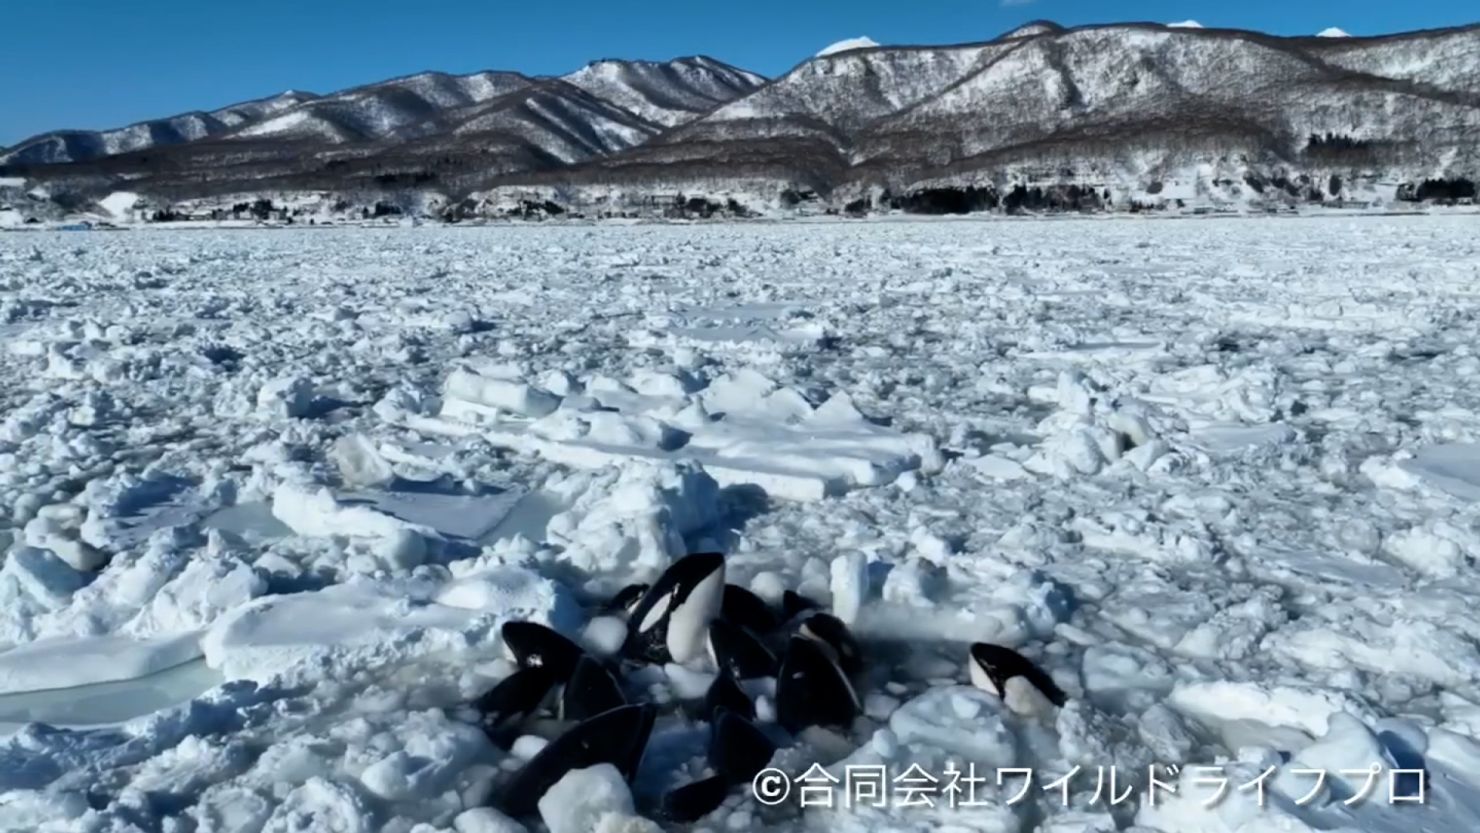 A pod of at least 10 killer whales appears to be trapped by sea ice off Japan's northern island of Hokkaido, public broadcaster NHK reported on Tuesday.